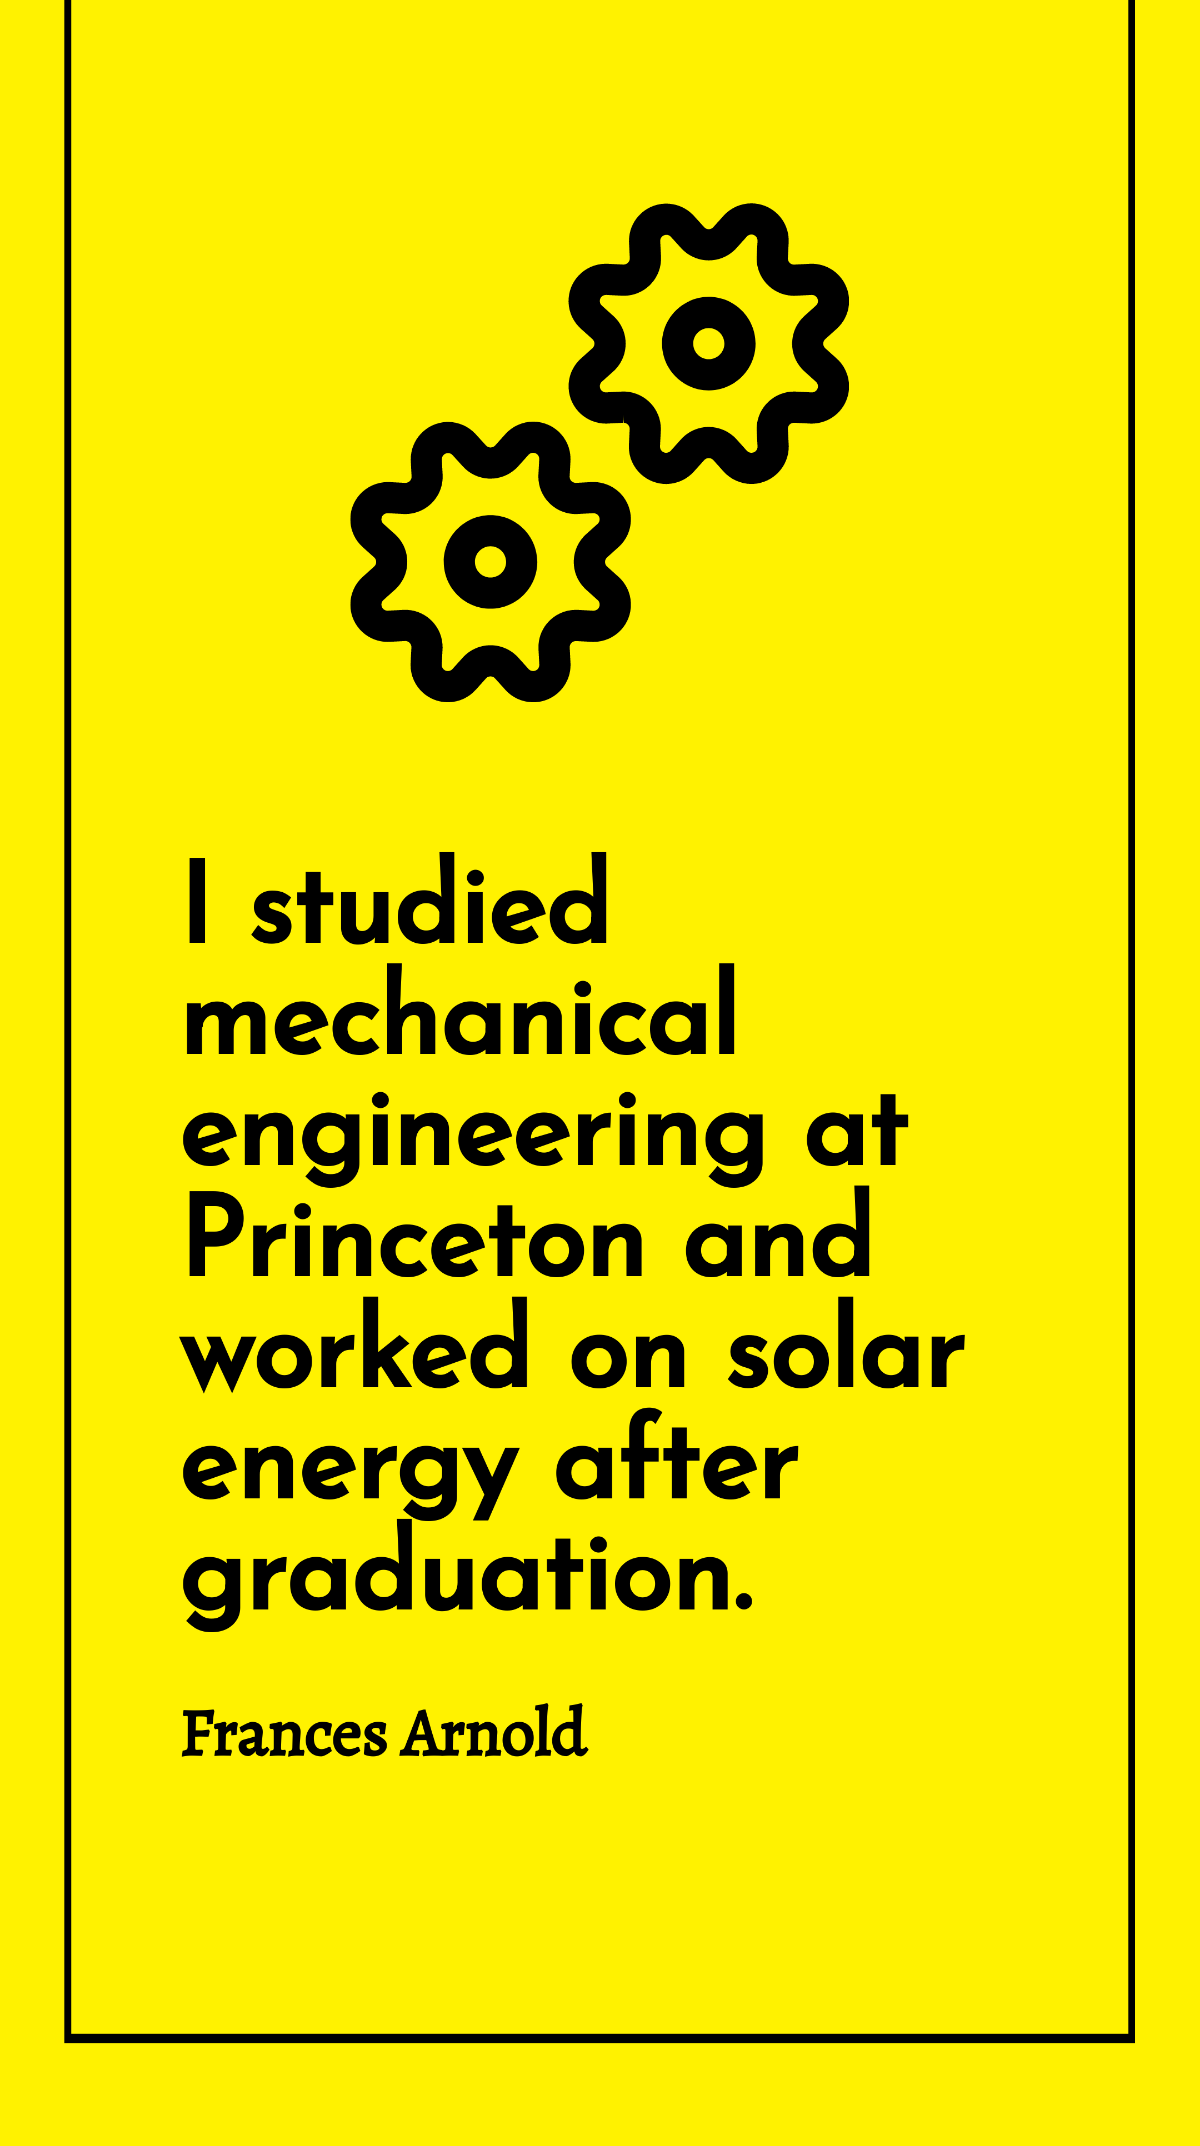 Frances Arnold - I studied mechanical engineering at Princeton and worked on solar energy after graduation. Template